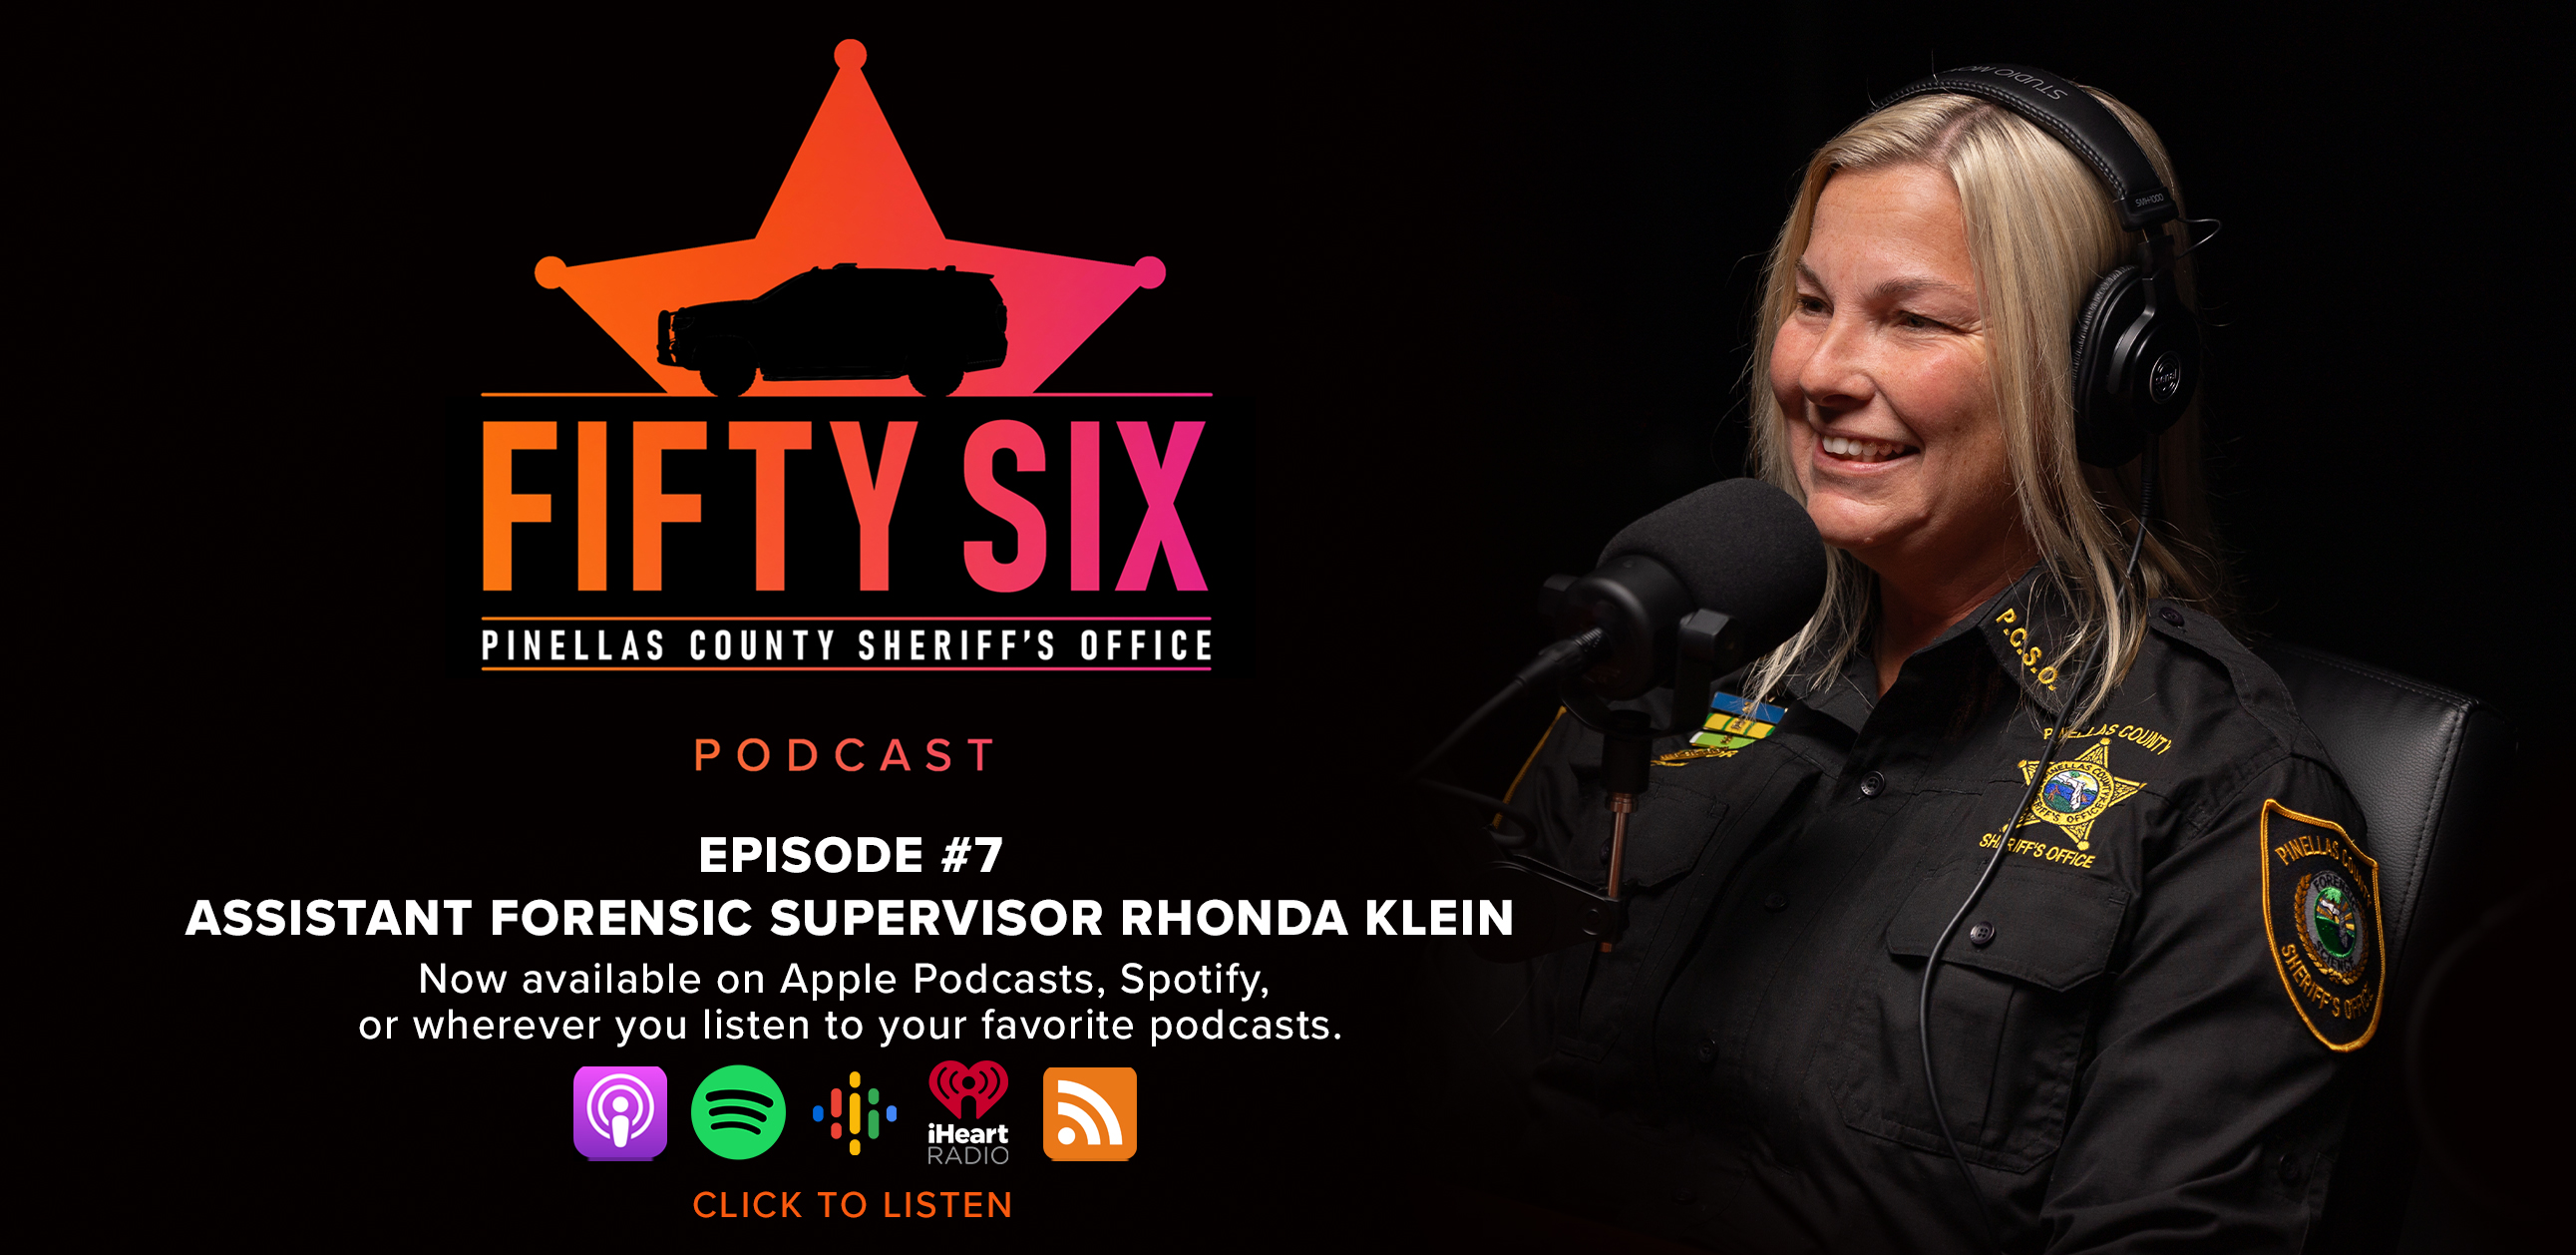 56 Podcast, Episode 7 Assistant Forensic Supervisor Rhonda Klein, now available wherever you listen to your favorite podcasts.